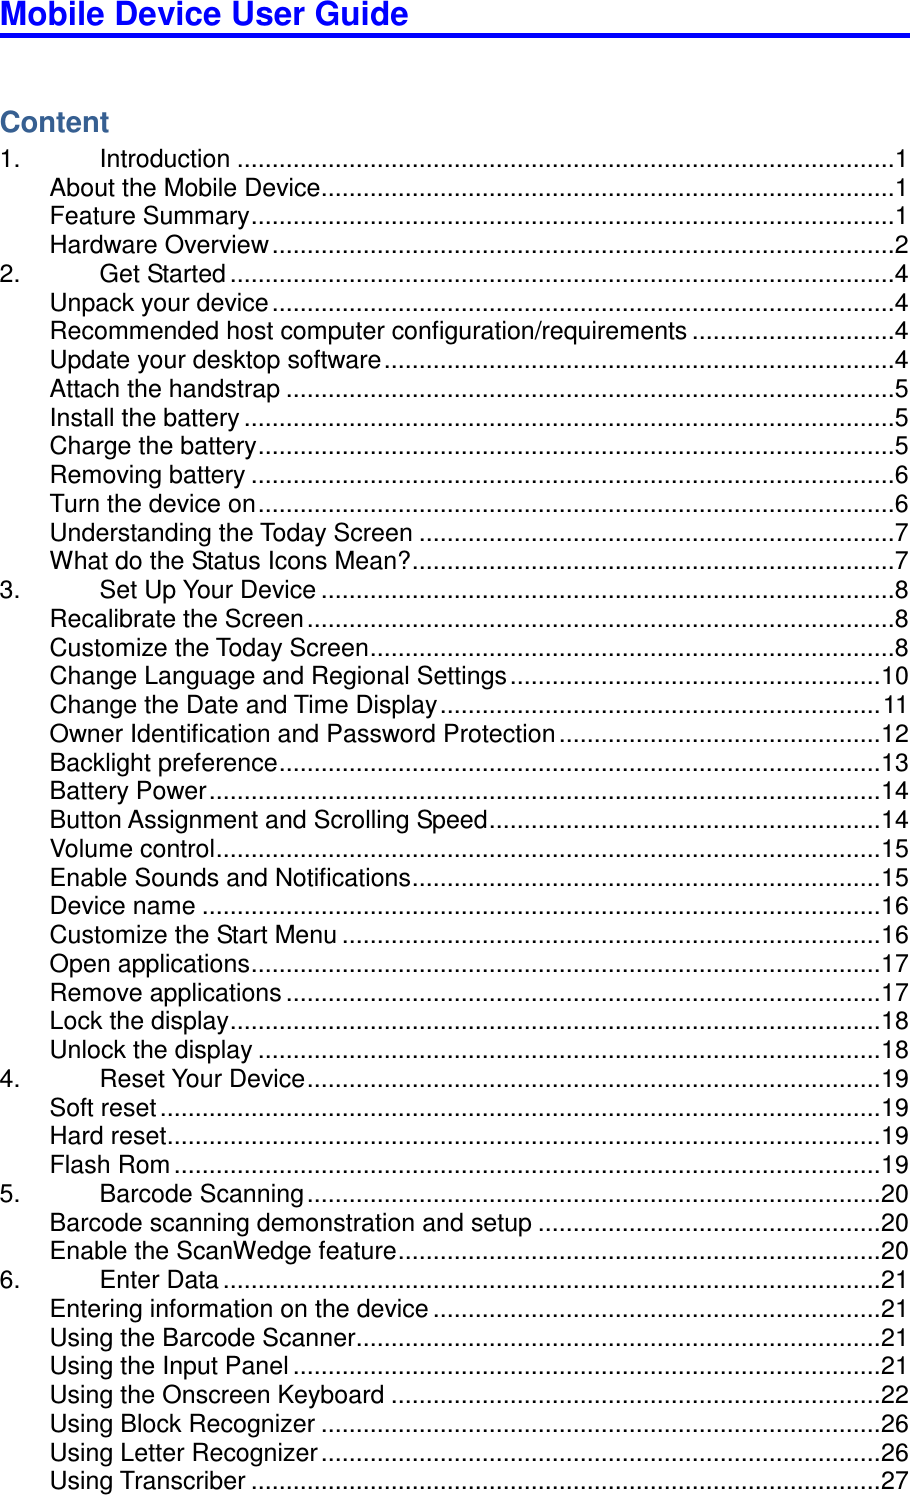 Mobile Device User Guide                                                                                                                                                                                                                                                                                                                                                                                                                                                                                                                                        Content 1.  Introduction ..............................................................................................1 About the Mobile Device ..................................................................................1 Feature Summary ............................................................................................1 Hardware Overview .........................................................................................2 2.  Get Started ...............................................................................................4 Unpack your device .........................................................................................4 Recommended host computer configuration/requirements .............................4 Update your desktop software .........................................................................4 Attach the handstrap .......................................................................................5 Install the battery .............................................................................................5 Charge the battery ...........................................................................................5 Removing battery ............................................................................................6 Turn the device on ...........................................................................................6 Understanding the Today Screen ....................................................................7 What do the Status Icons Mean? .....................................................................7 3.  Set Up Your Device ..................................................................................8 Recalibrate the Screen ....................................................................................8 Customize the Today Screen ...........................................................................8 Change Language and Regional Settings ..................................................... 10 Change the Date and Time Display ............................................................... 11 Owner Identification and Password Protection .............................................. 12 Backlight preference ...................................................................................... 13 Battery Power ................................................................................................ 14 Button Assignment and Scrolling Speed ........................................................ 14 Volume control ............................................................................................... 15 Enable Sounds and Notifications ................................................................... 15 Device name ................................................................................................. 16 Customize the Start Menu ............................................................................. 16 Open applications .......................................................................................... 17 Remove applications ..................................................................................... 17 Lock the display ............................................................................................. 18 Unlock the display ......................................................................................... 18 4.  Reset Your Device .................................................................................. 19 Soft reset ....................................................................................................... 19 Hard reset ...................................................................................................... 19 Flash Rom ..................................................................................................... 19 5.  Barcode Scanning .................................................................................. 20 Barcode scanning demonstration and setup ................................................. 20 Enable the ScanWedge feature ..................................................................... 20 6.  Enter Data .............................................................................................. 21 Entering information on the device ................................................................ 21 Using the Barcode Scanner ........................................................................... 21 Using the Input Panel .................................................................................... 21 Using the Onscreen Keyboard ...................................................................... 22 Using Block Recognizer ................................................................................ 26 Using Letter Recognizer ................................................................................ 26 Using Transcriber .......................................................................................... 27 